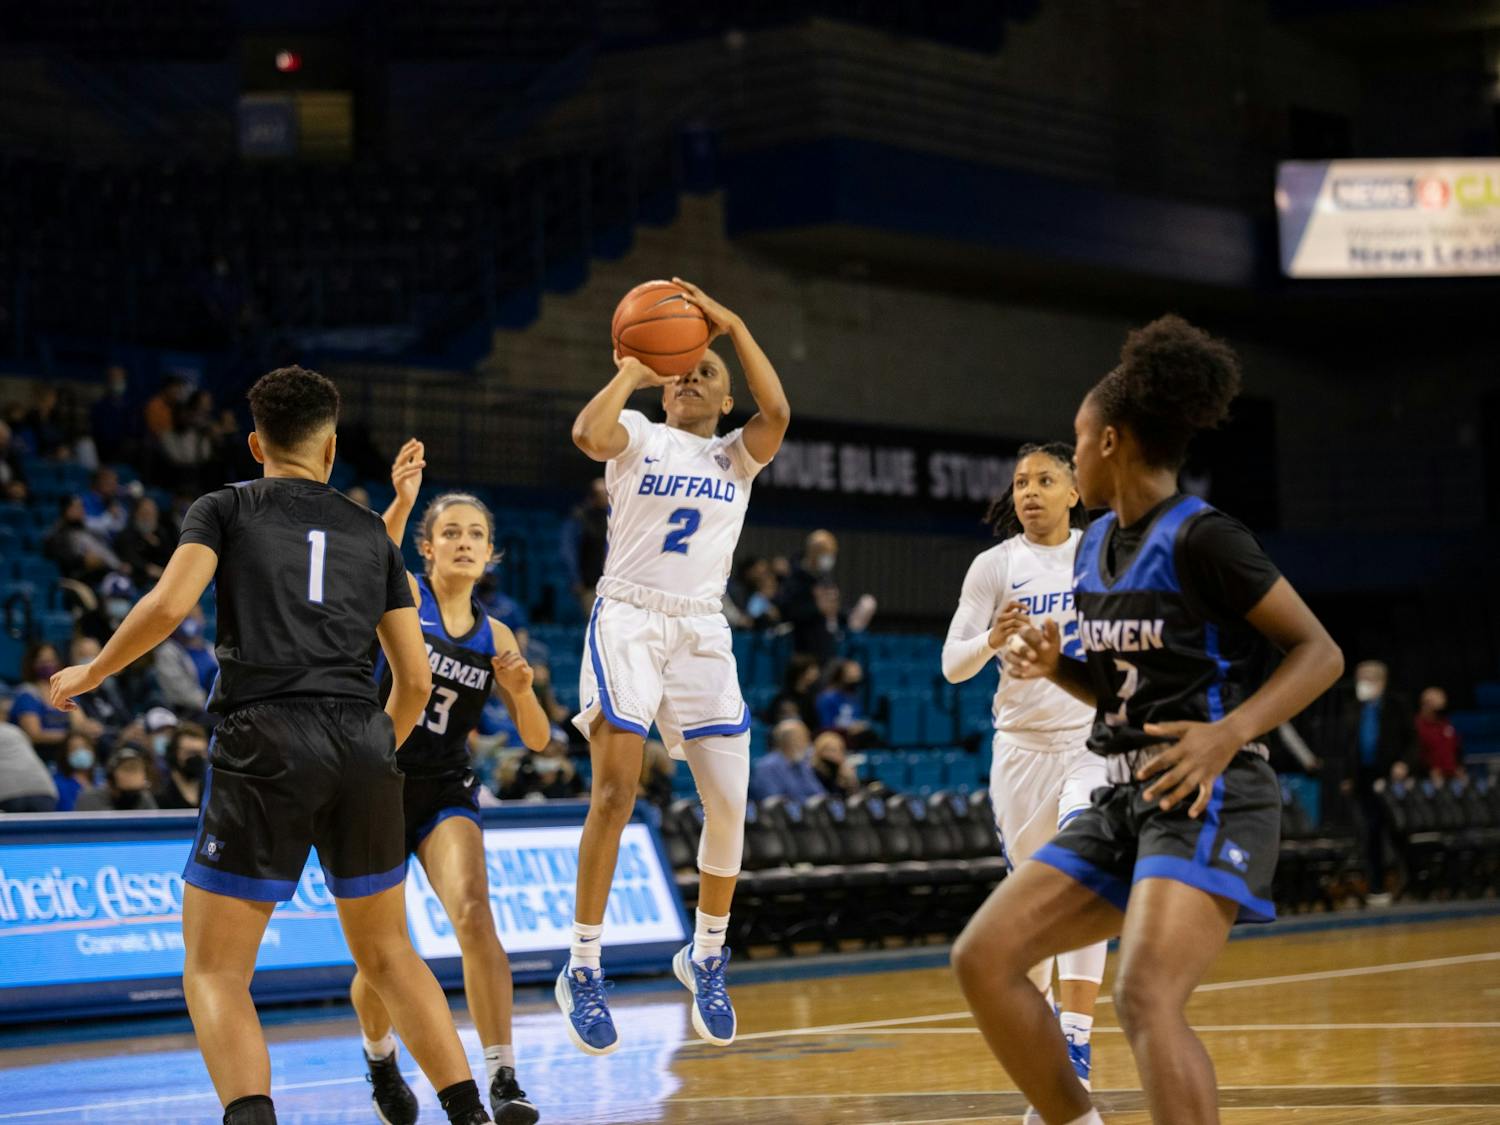 Junior guard Dyaisha Fair led the way for UB on Saturday with 28 points and two steals.